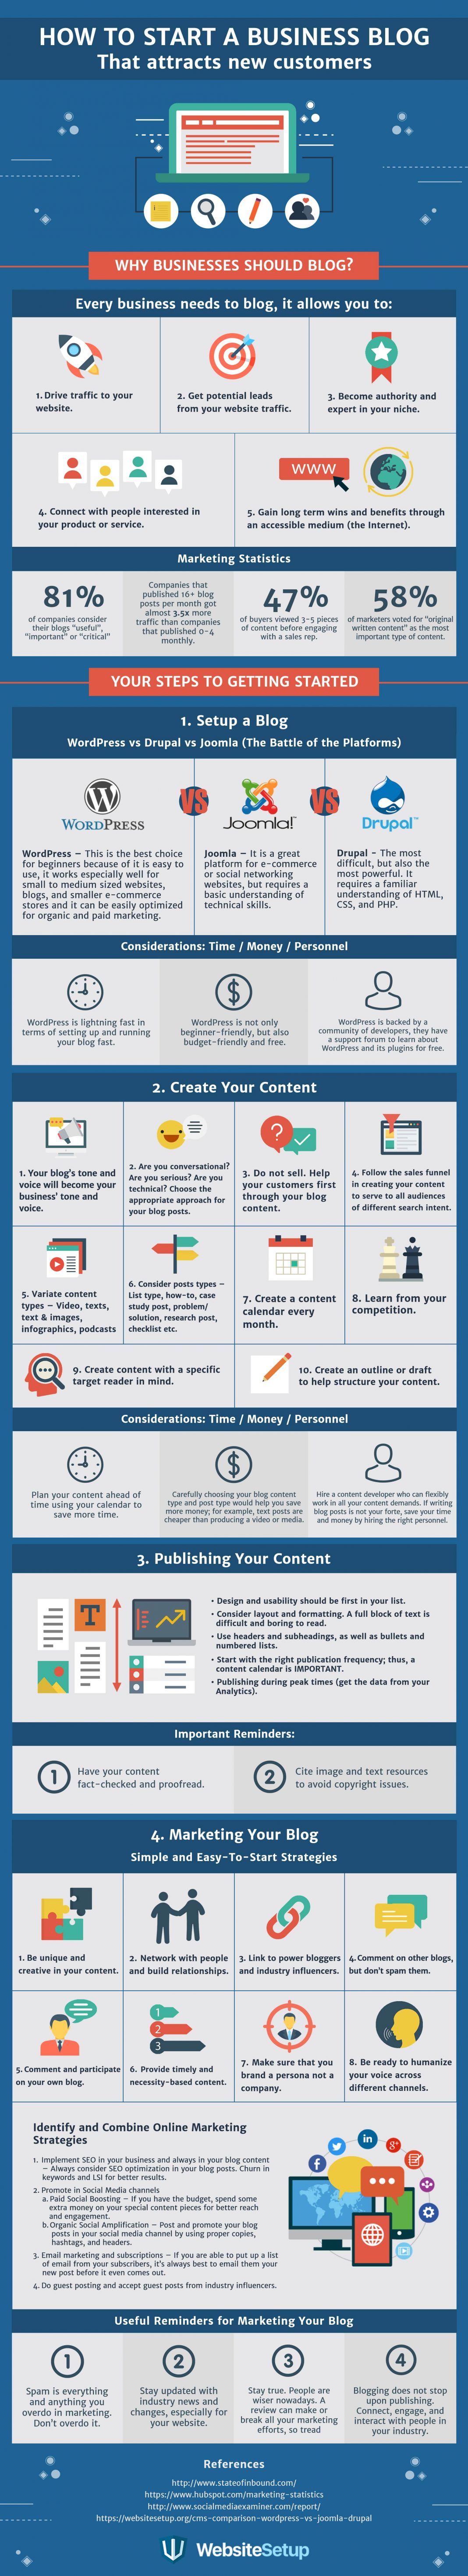 Do You Need a Blog for Your Business? [Infographic]